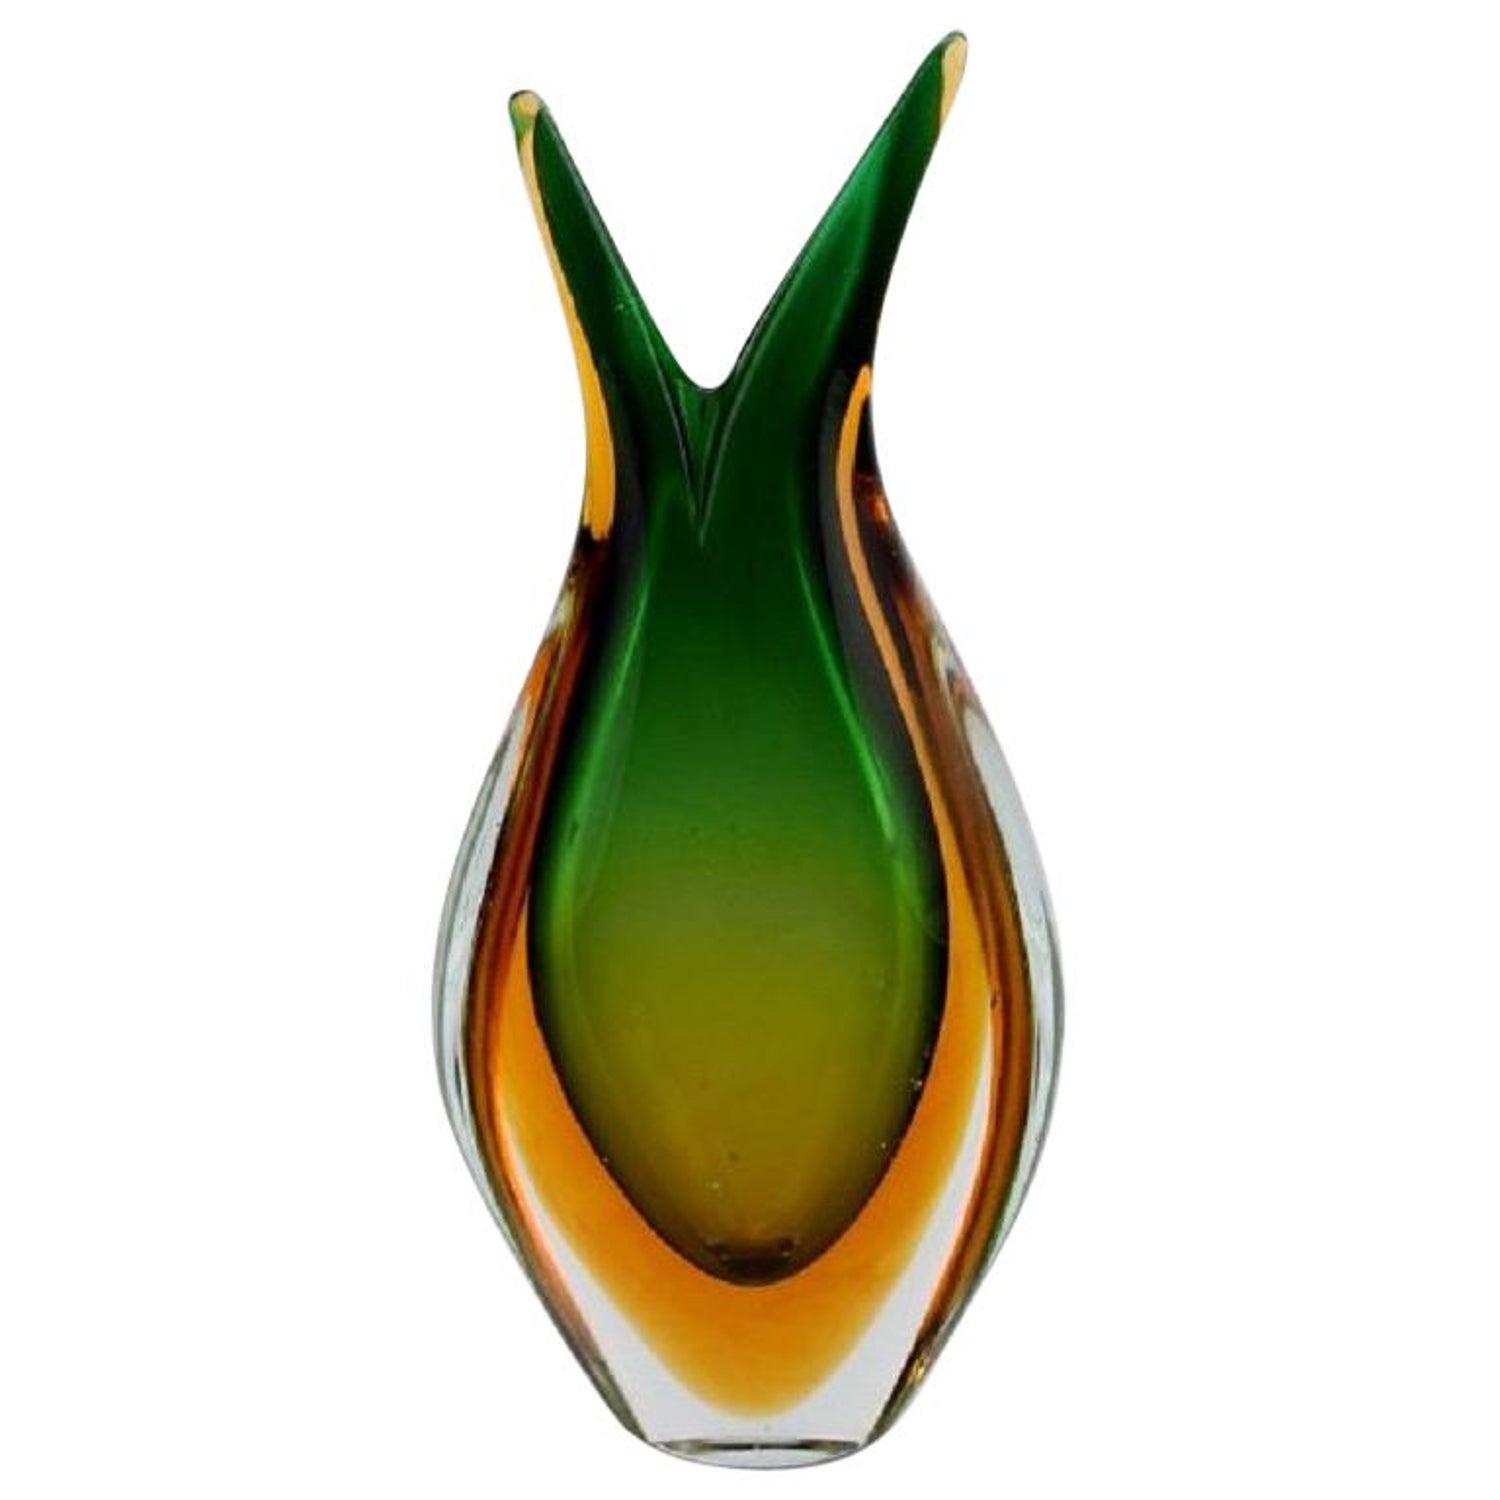 Murano Vase in Green and Orange Mouth Blown Art Glass, Italian Design,  1960s at 1stDibs